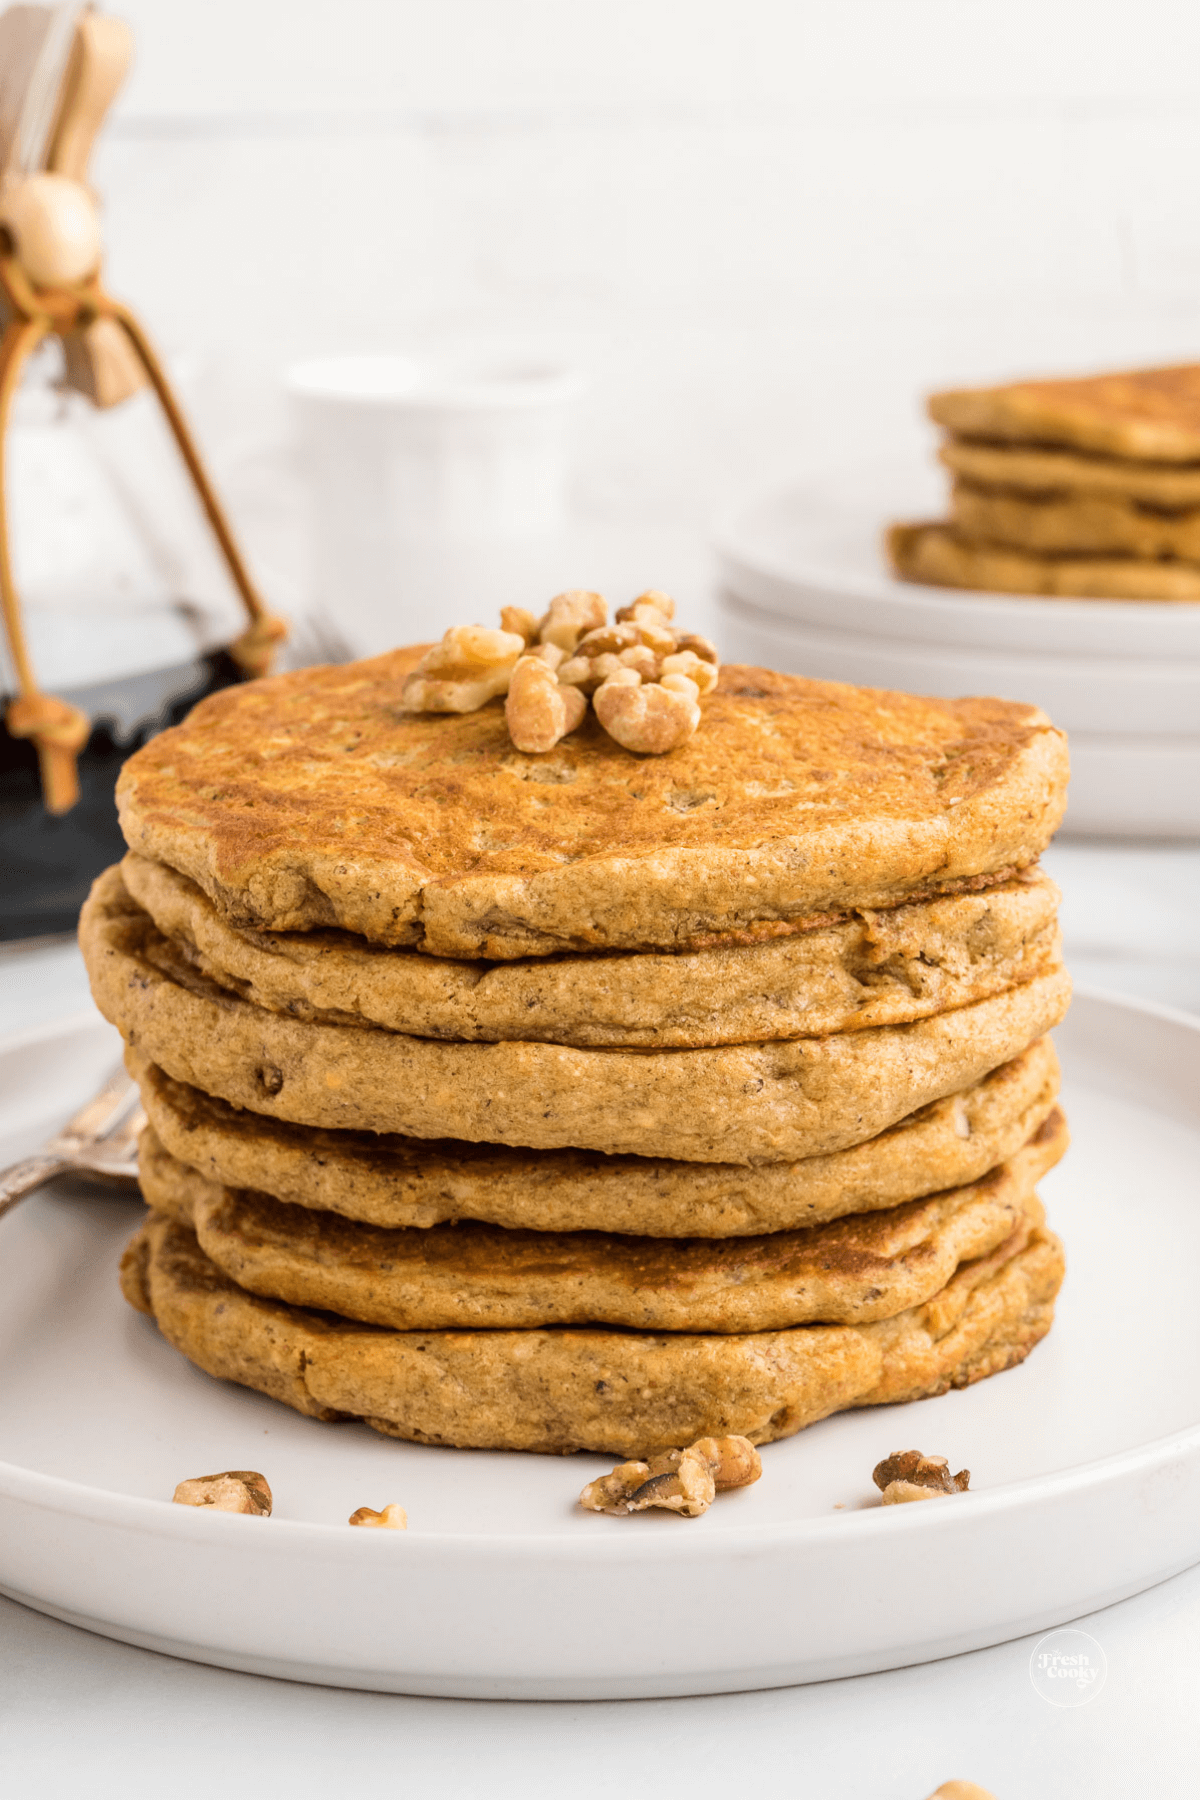 Stack of pancakes sprinkled with some chopped walnuts.